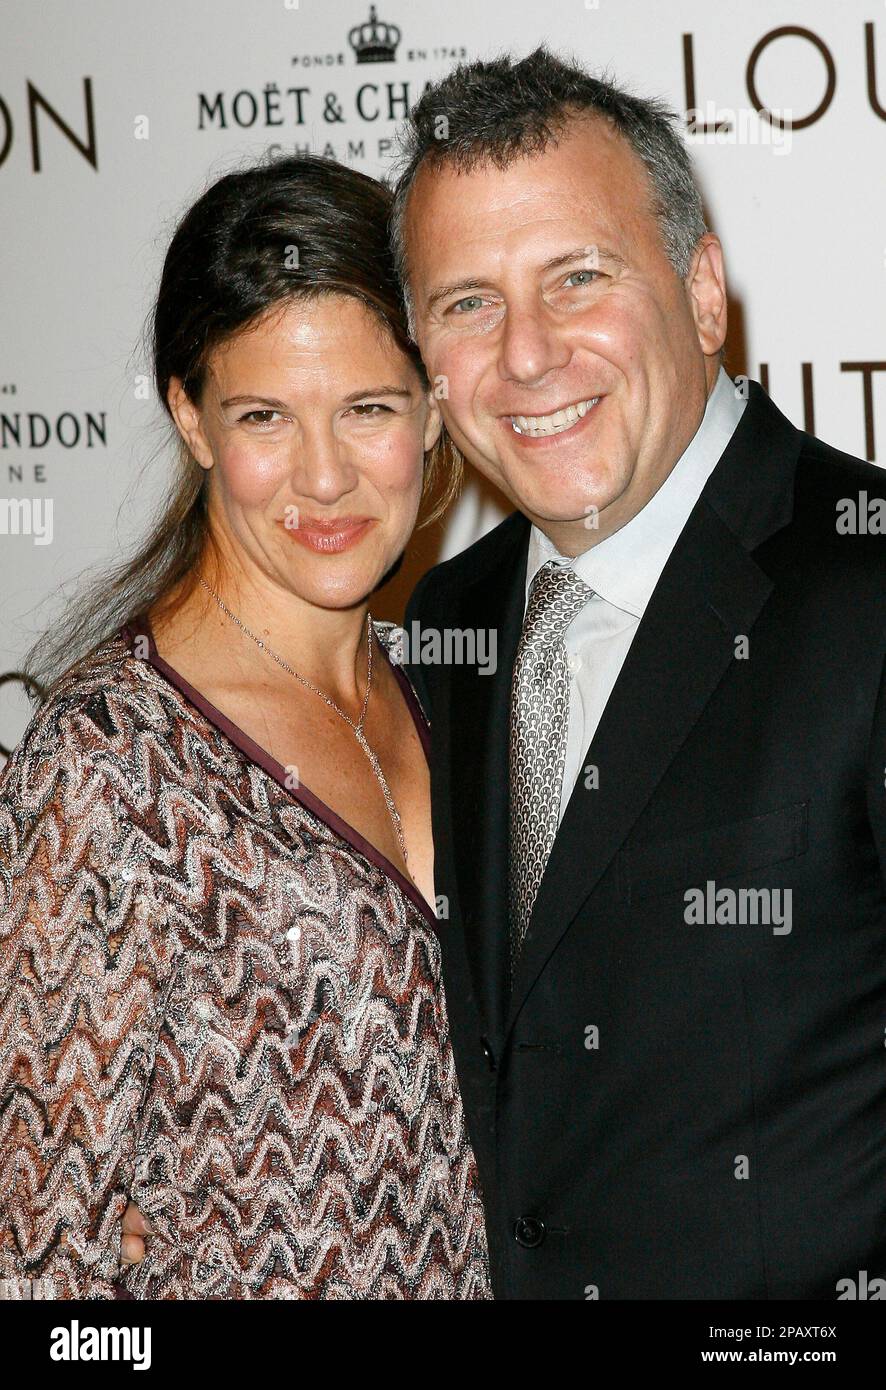 Actor Paul Reiser and his wife Paula Ravets arrive at the Louis Vuitton  Gala Murakami Exhibition in Los Angeles, Sunday, Oct. 28, 2007. (AP  Photo/Gus Ruelas Stockfotografie - Alamy